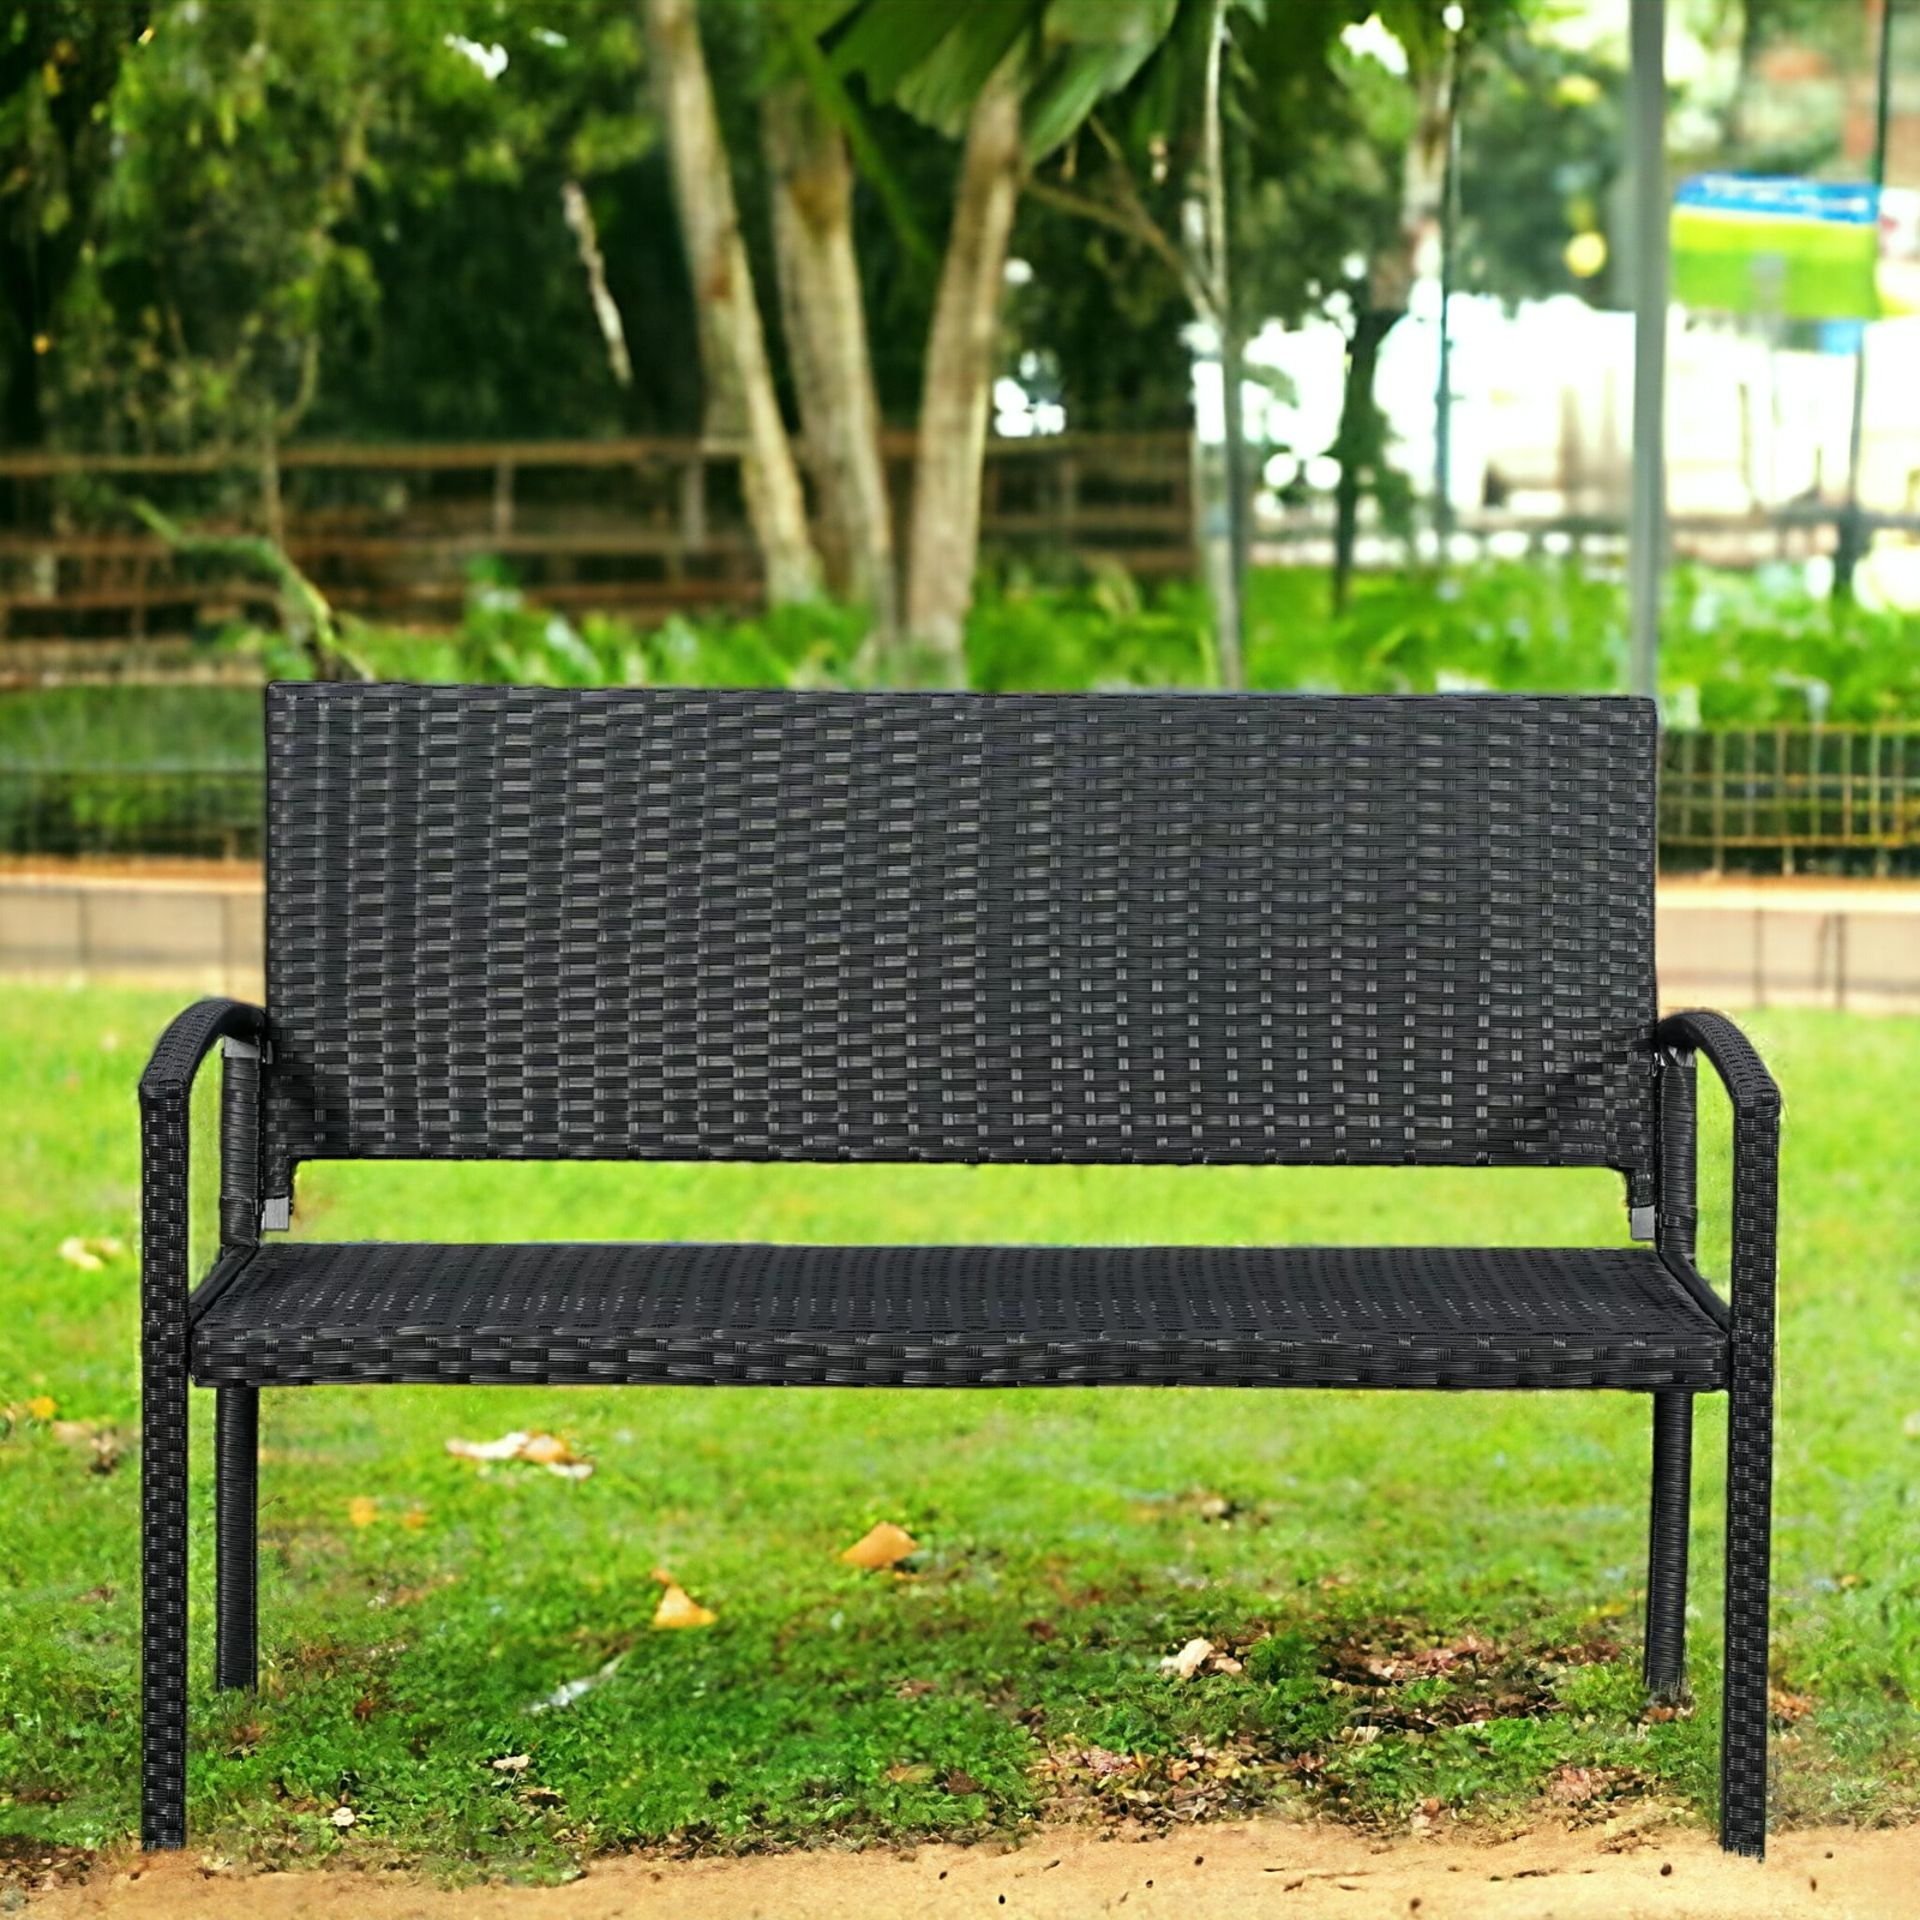 FREE DELIVERY- STYLISH PATIO RATTAN 2 SEATER LOVE SEAT GARDEN BENCH IN BLACK - Image 3 of 3